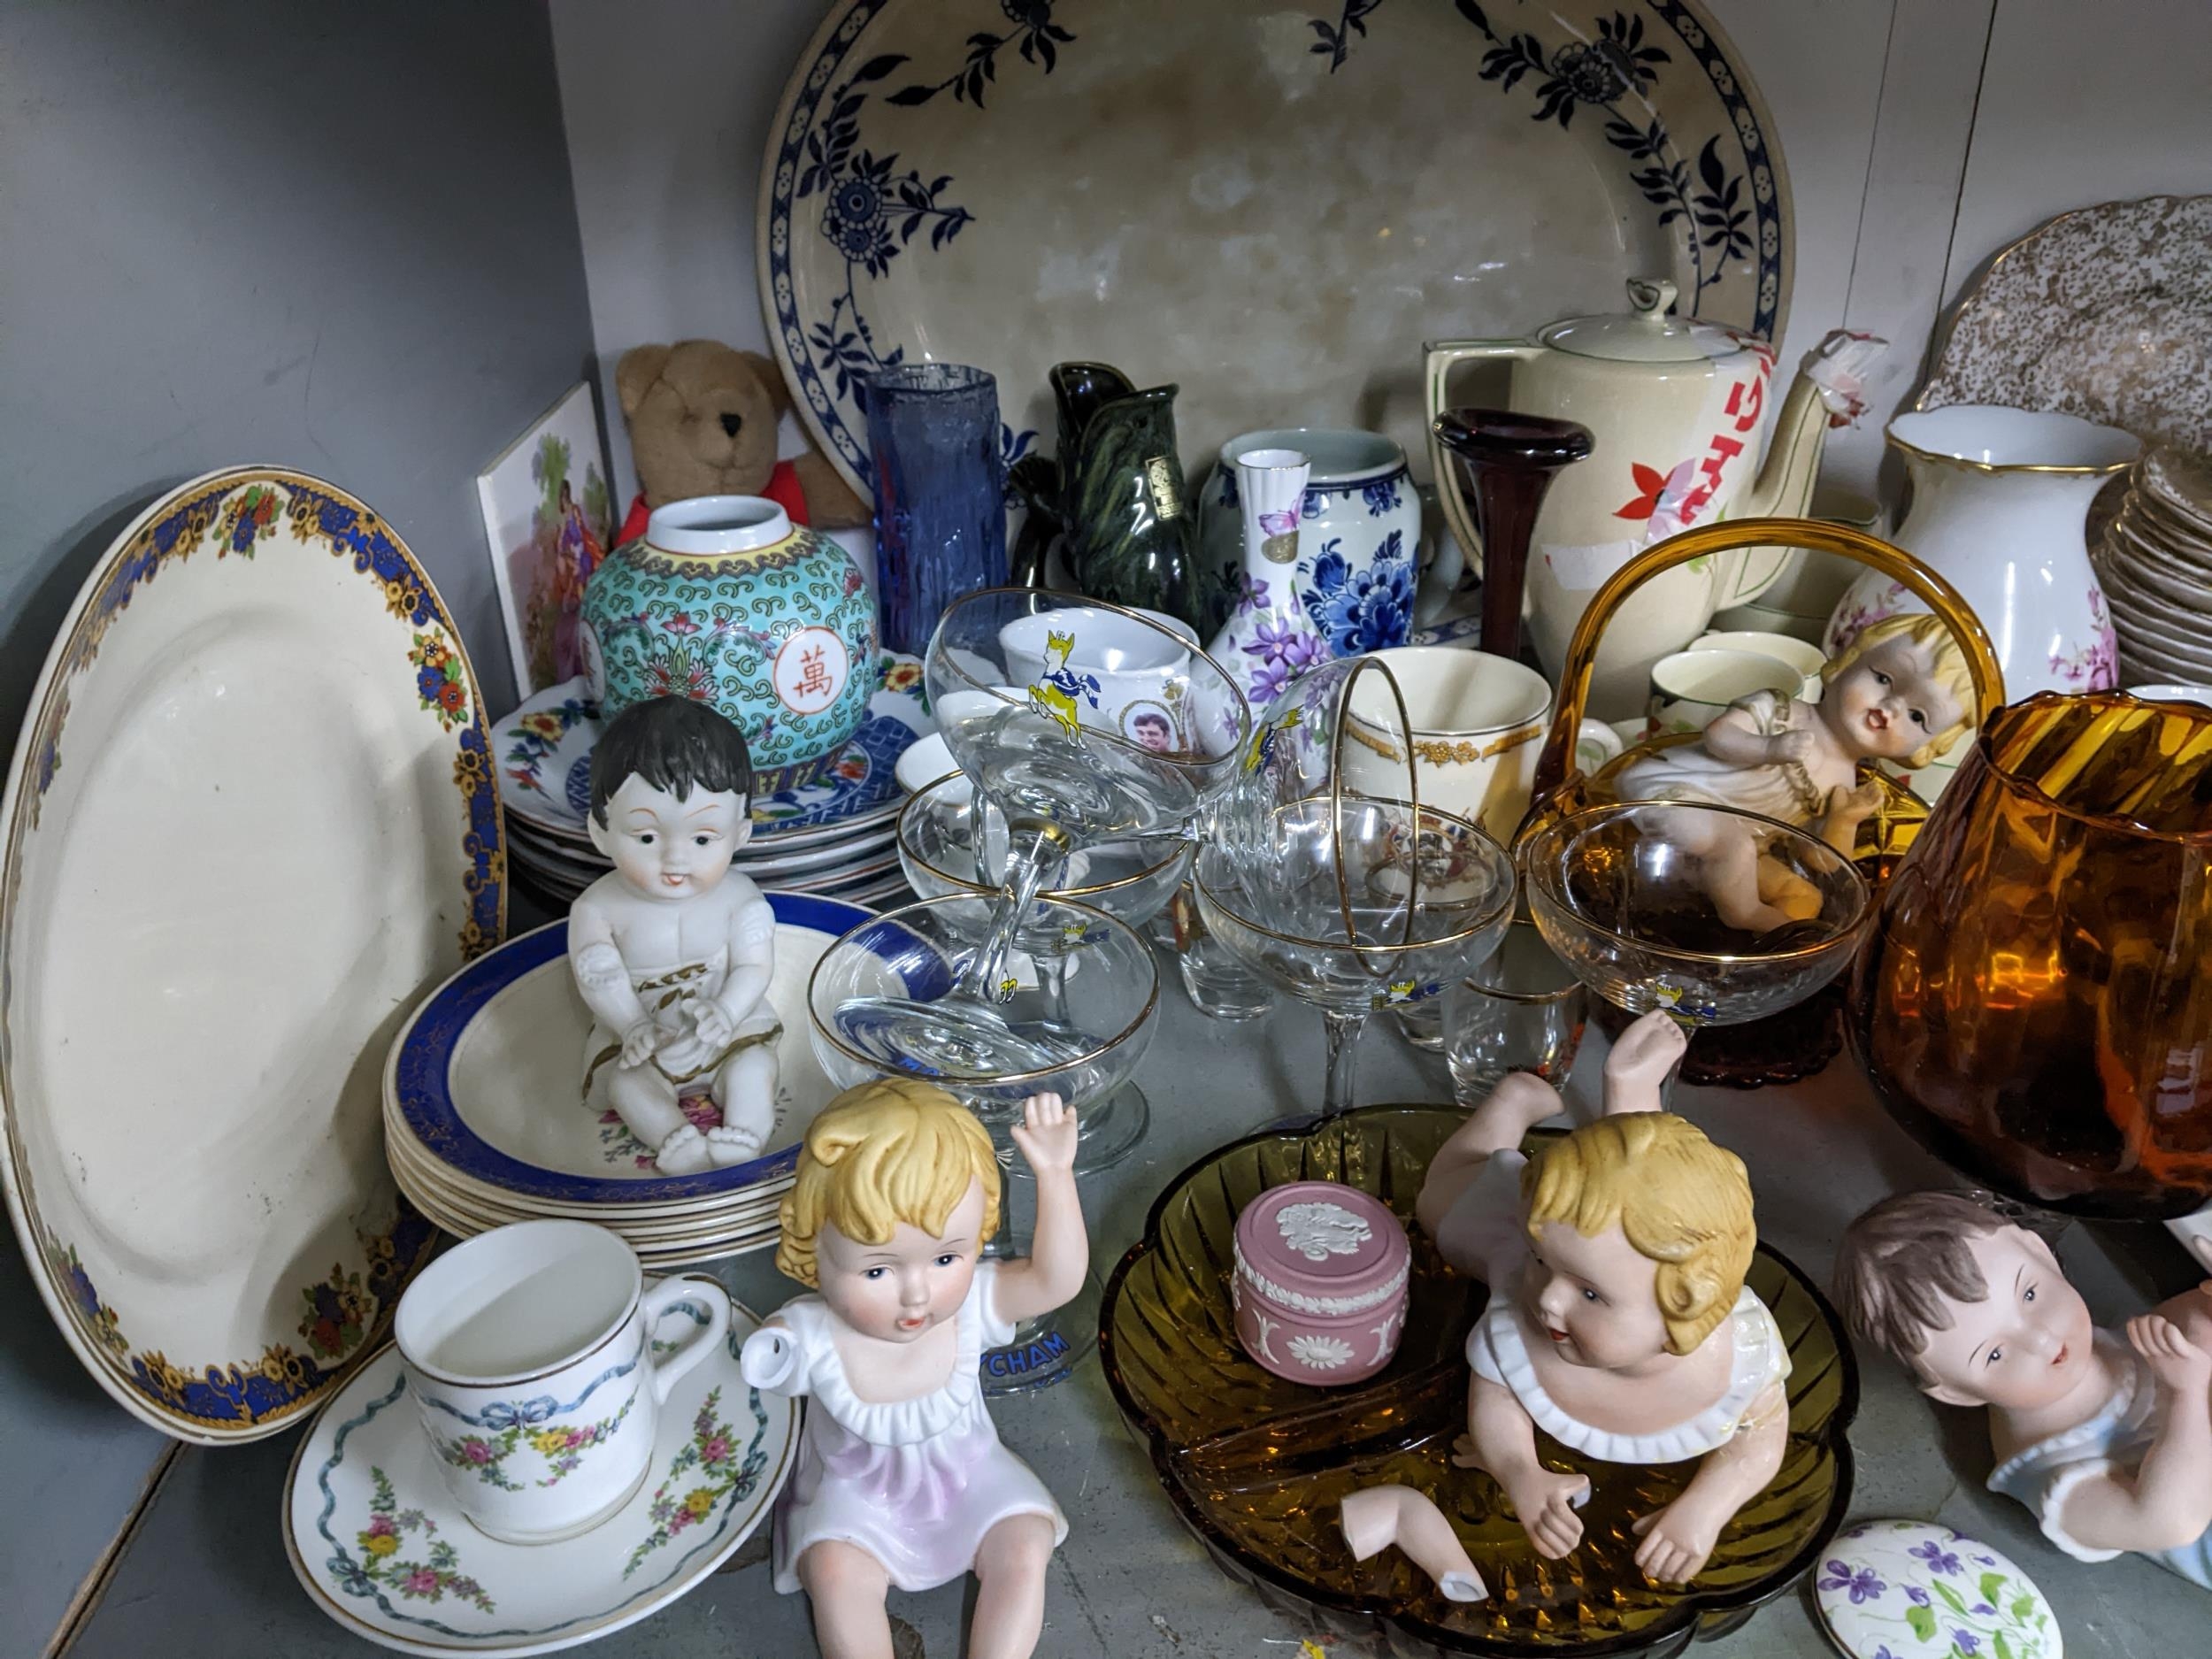 A mixed lot of ceramics, glassware and other items to include Wedgwood Jasper ware, piano babies, - Image 2 of 5